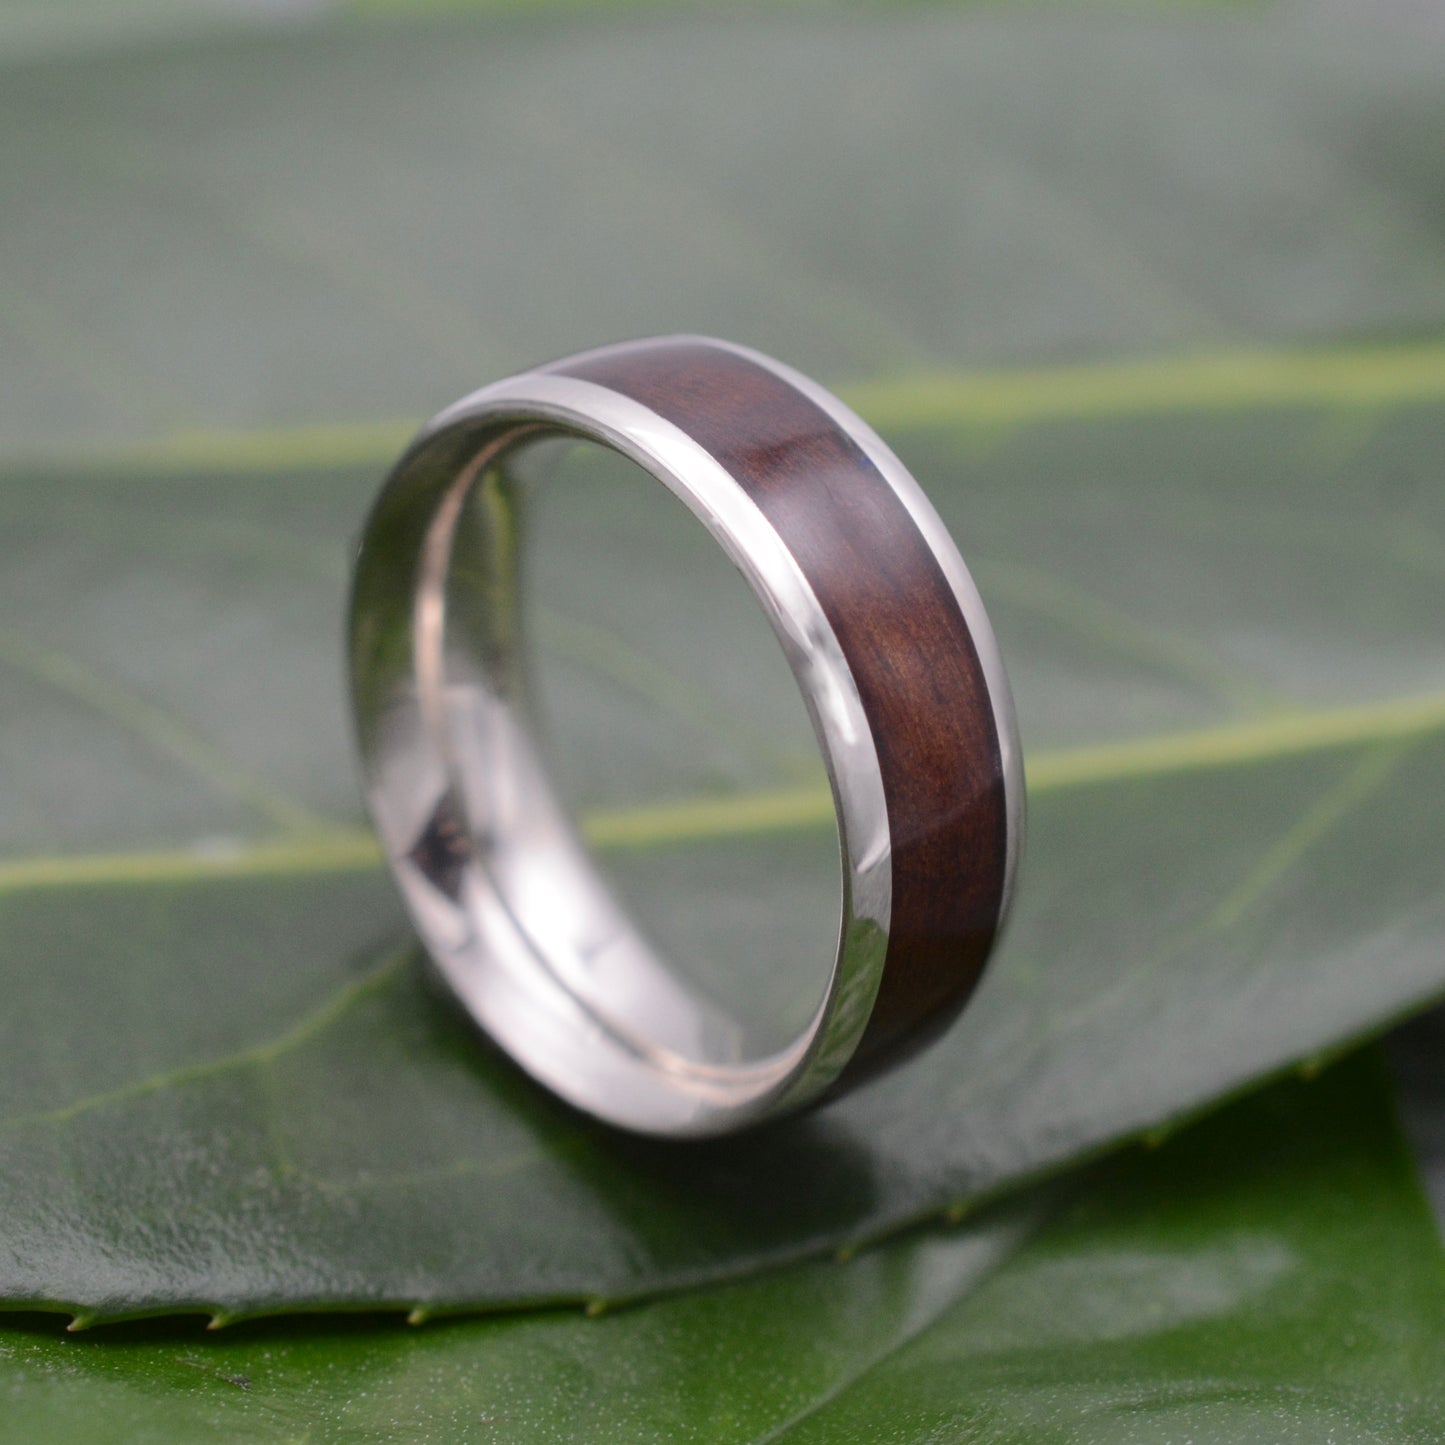 a silver ring with a wooden inlay on a leaf